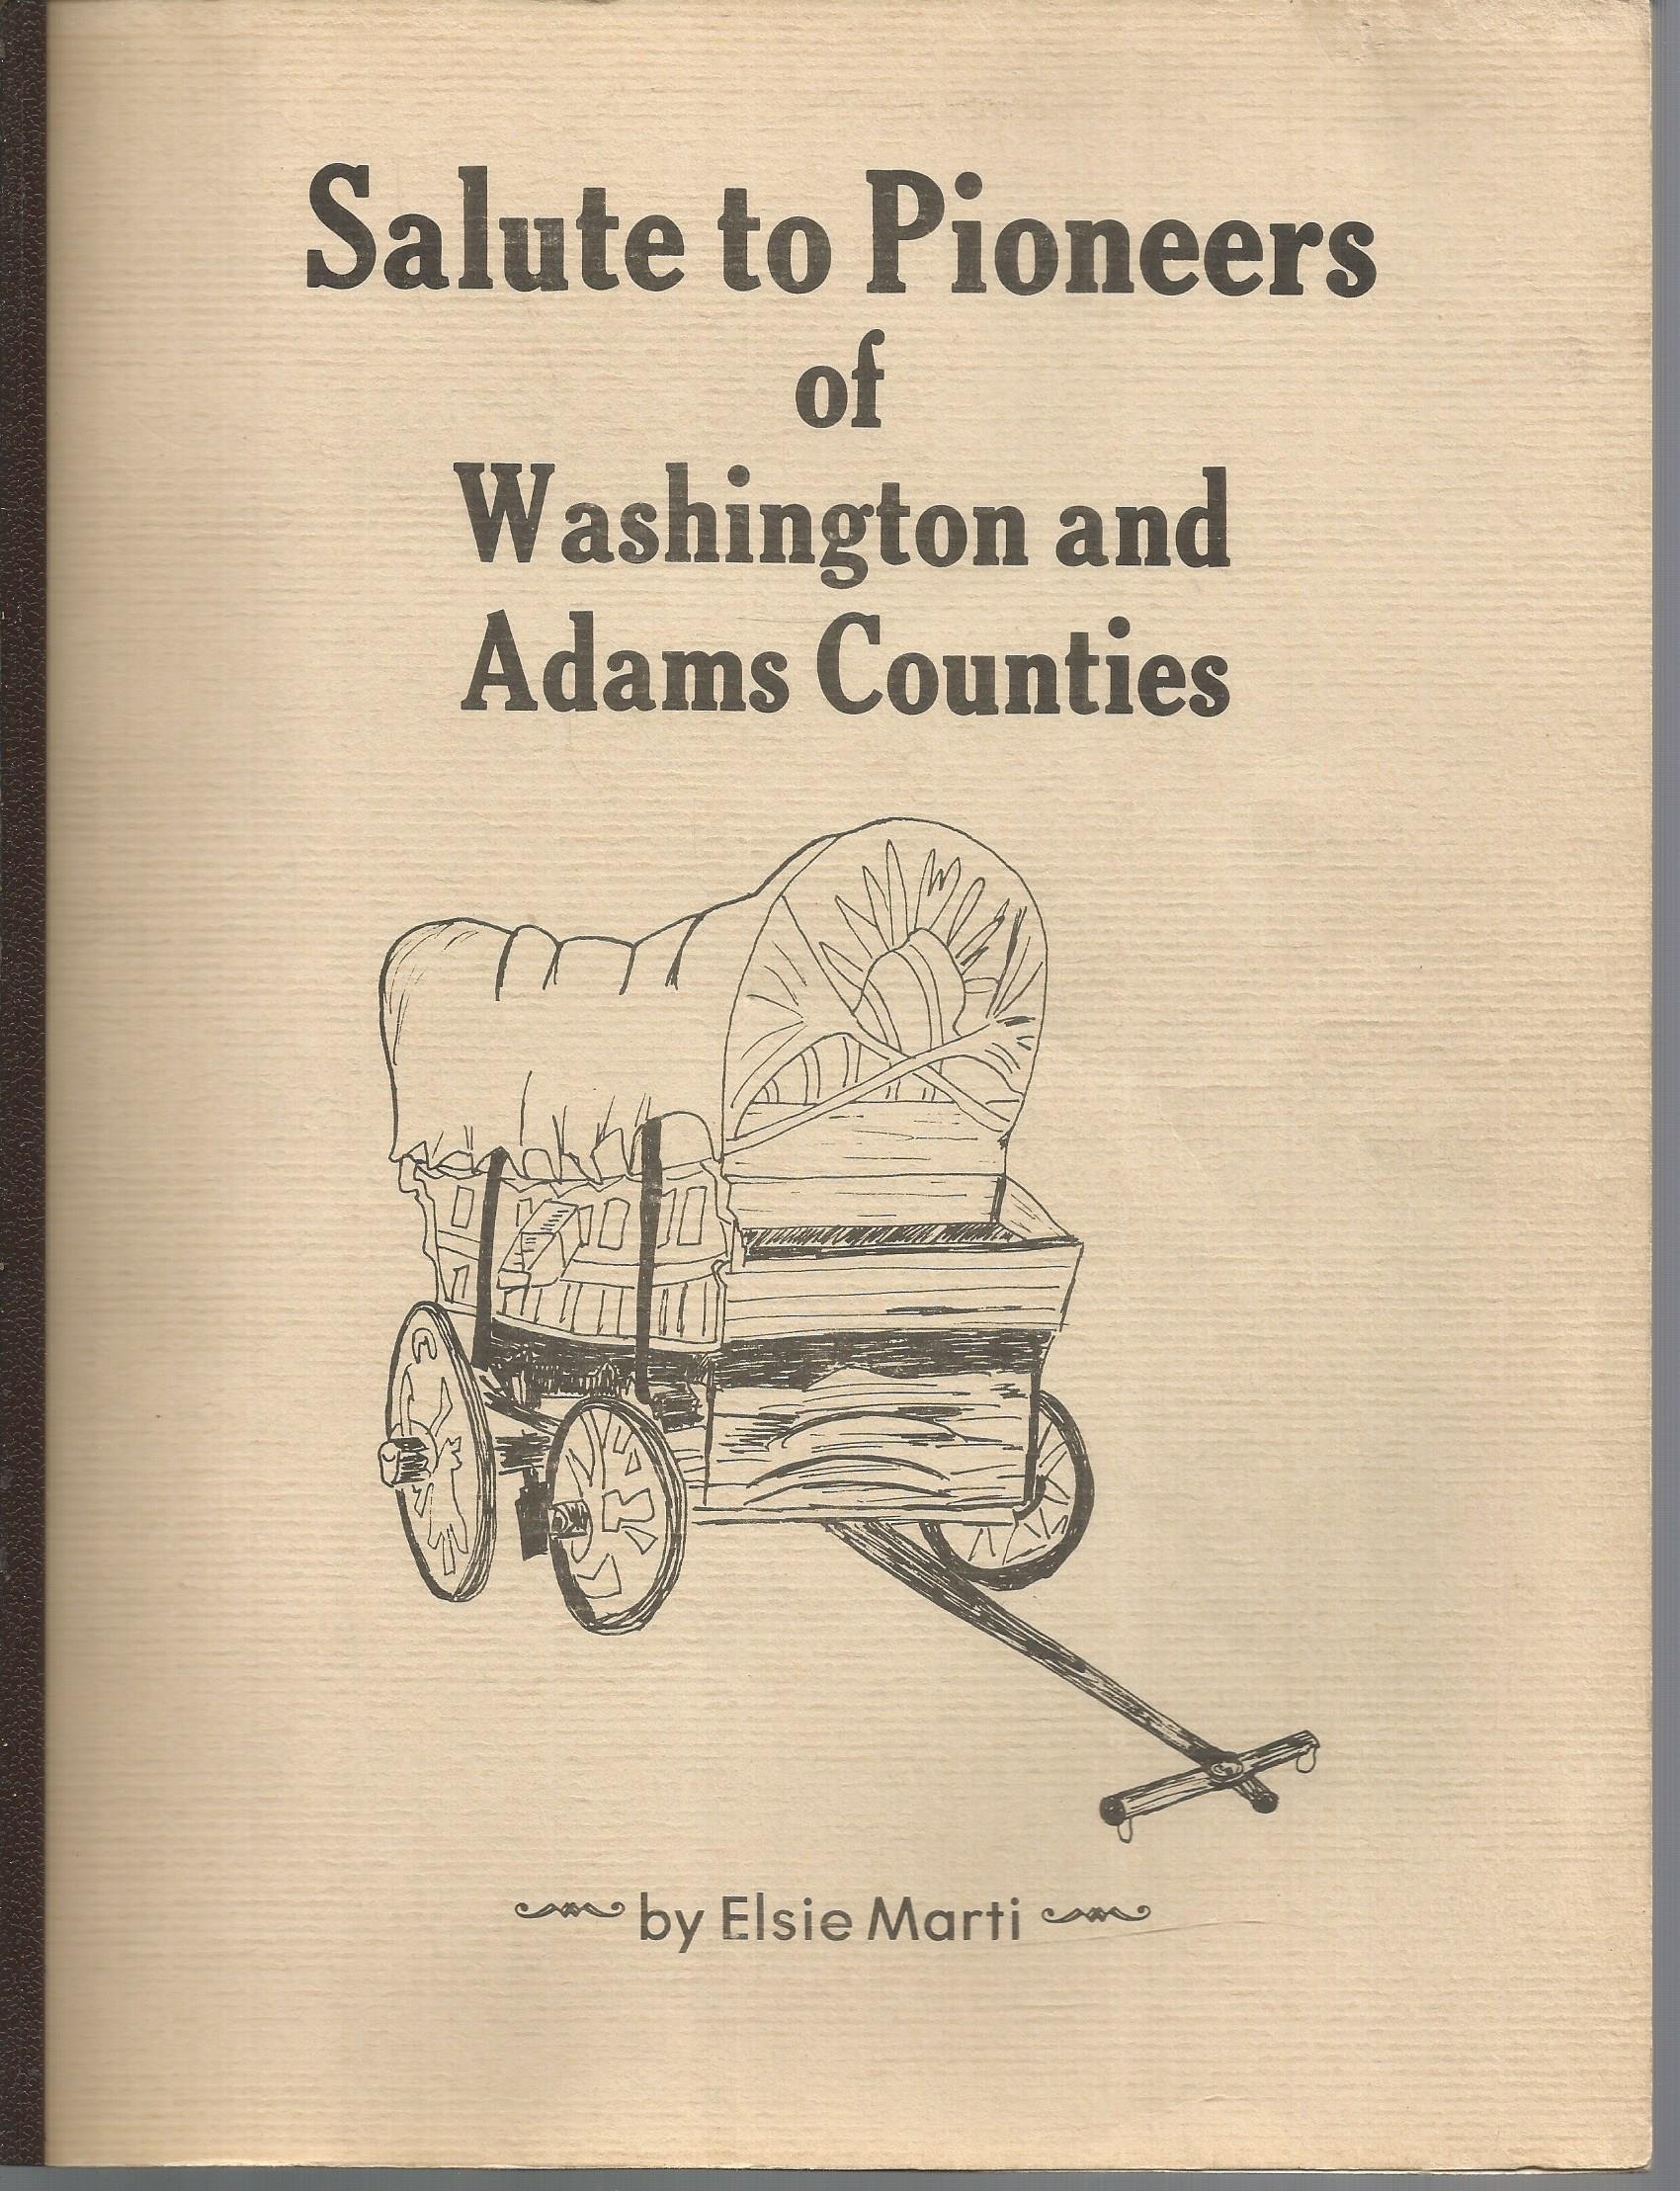 Salute to pioneers of Washington and Adams counties (book cover)